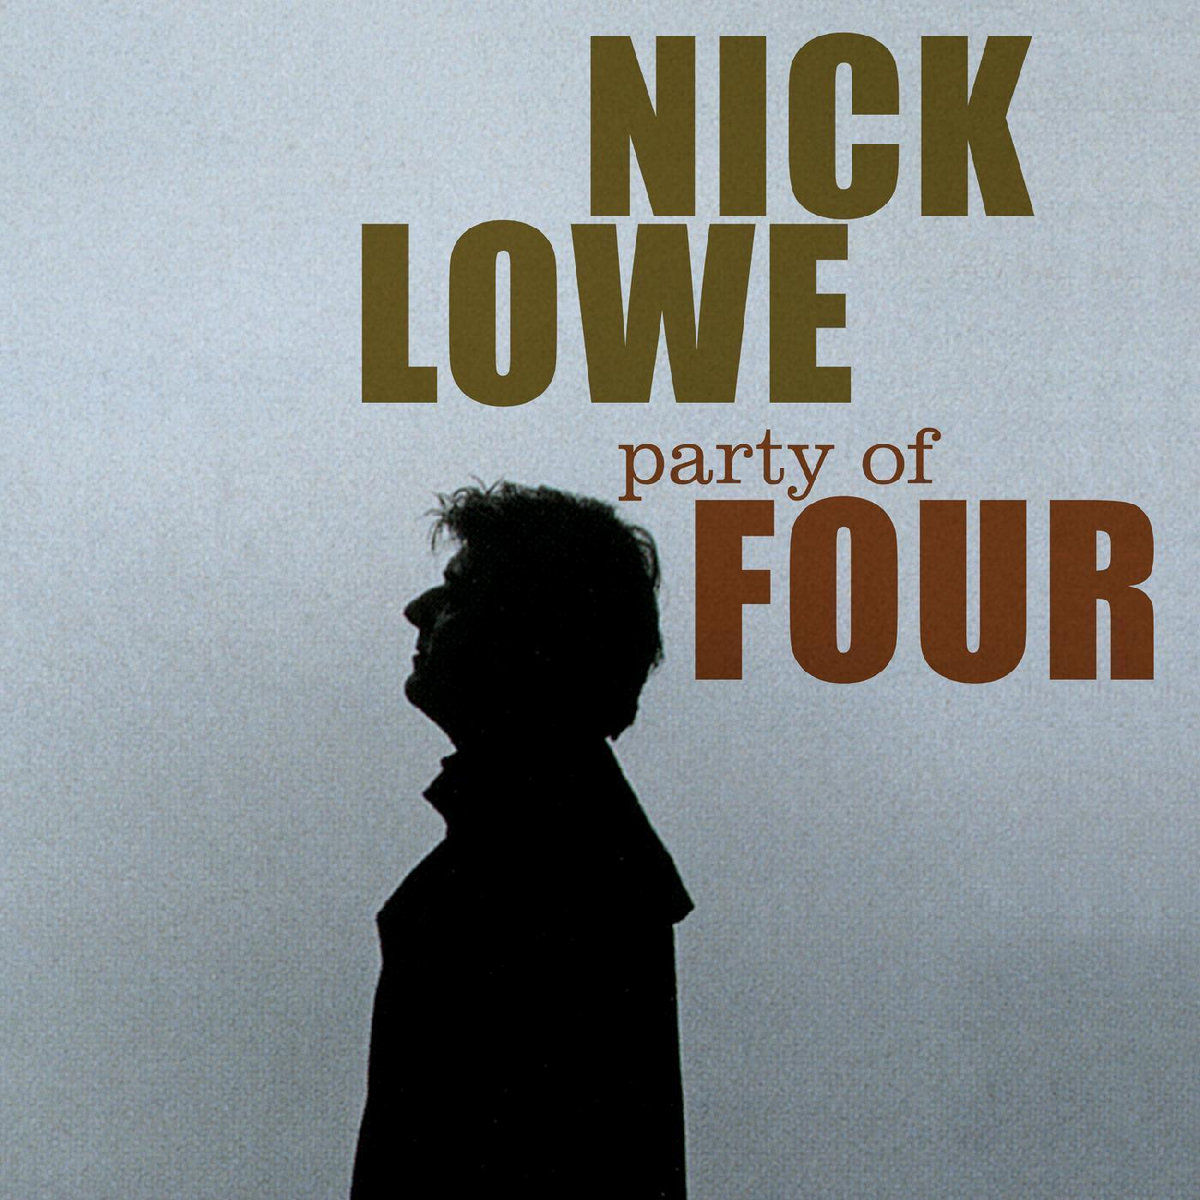 Nick Lowe - Party of Four (EP) (2020) [FLAC 24bit/44,1kHz]